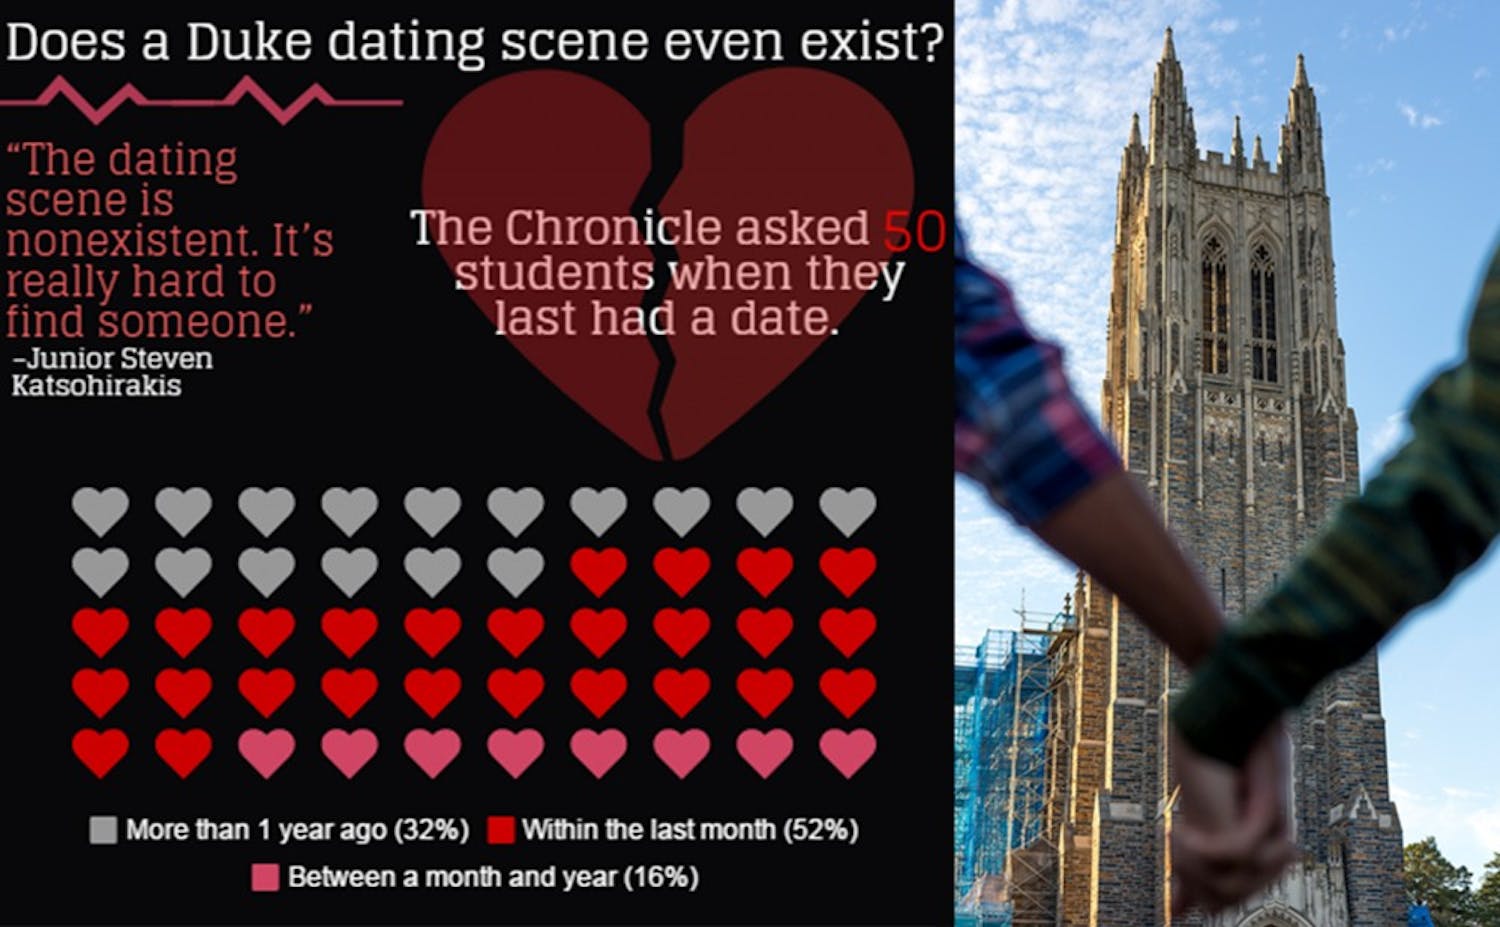 The Chronicle recently asked 50 random students when they had last been on a date.